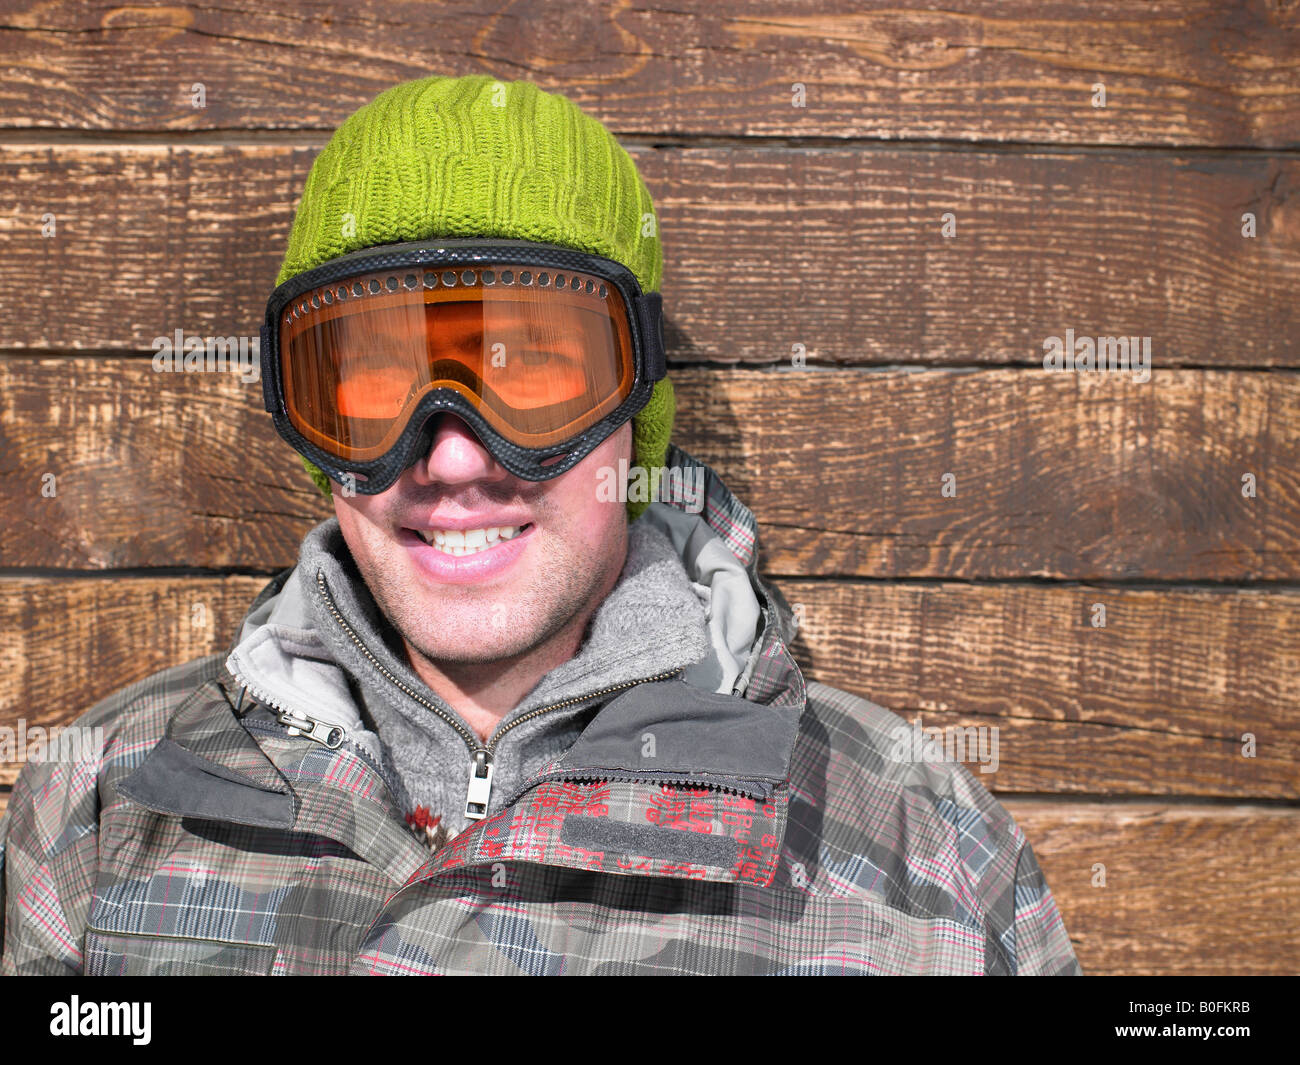 Snow Gear High Resolution Stock Photography and Images - Alamy